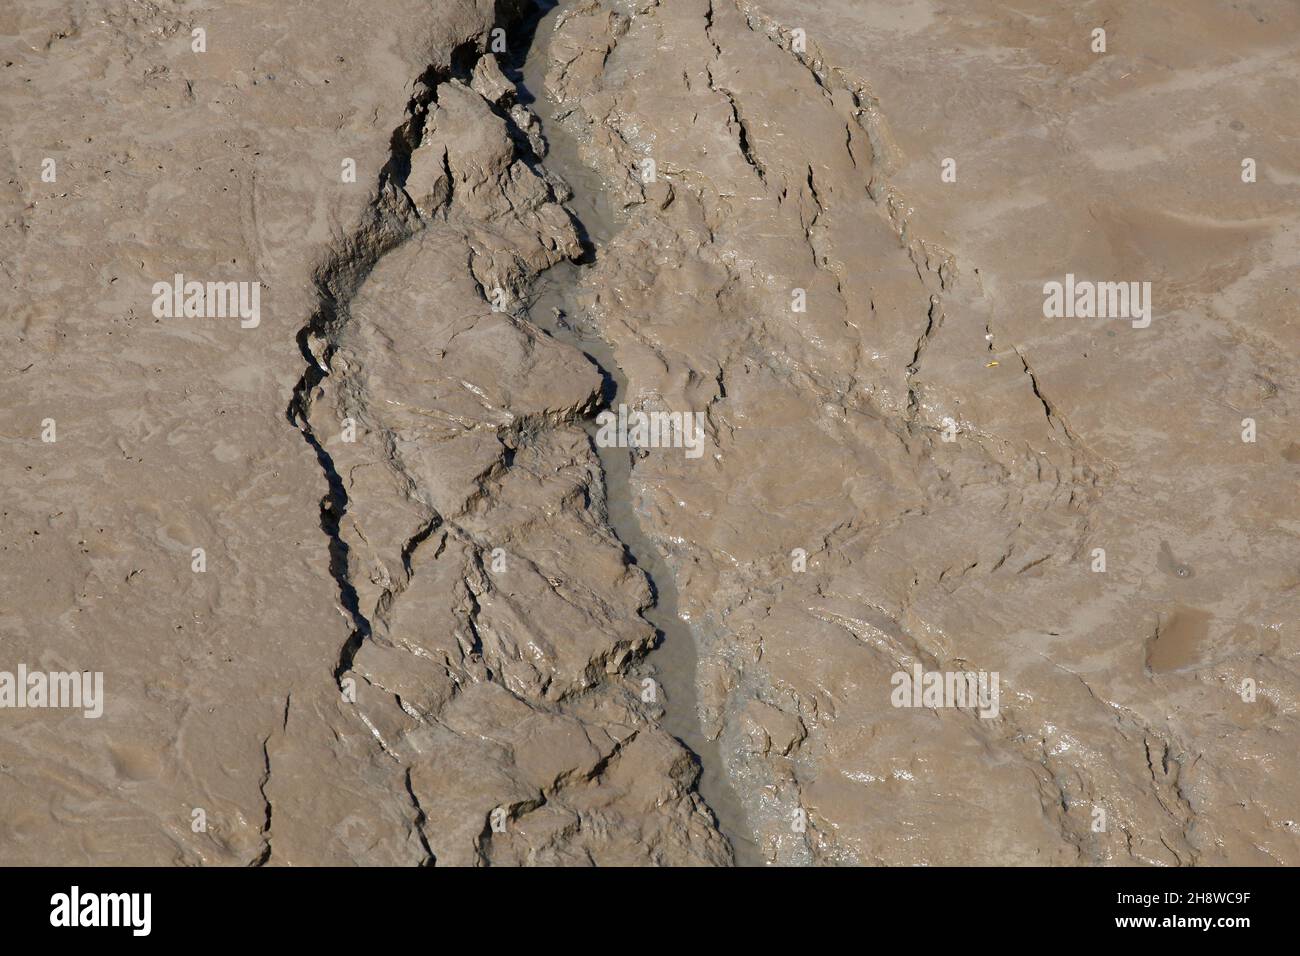 Silt in a river at low tide Stock Photo